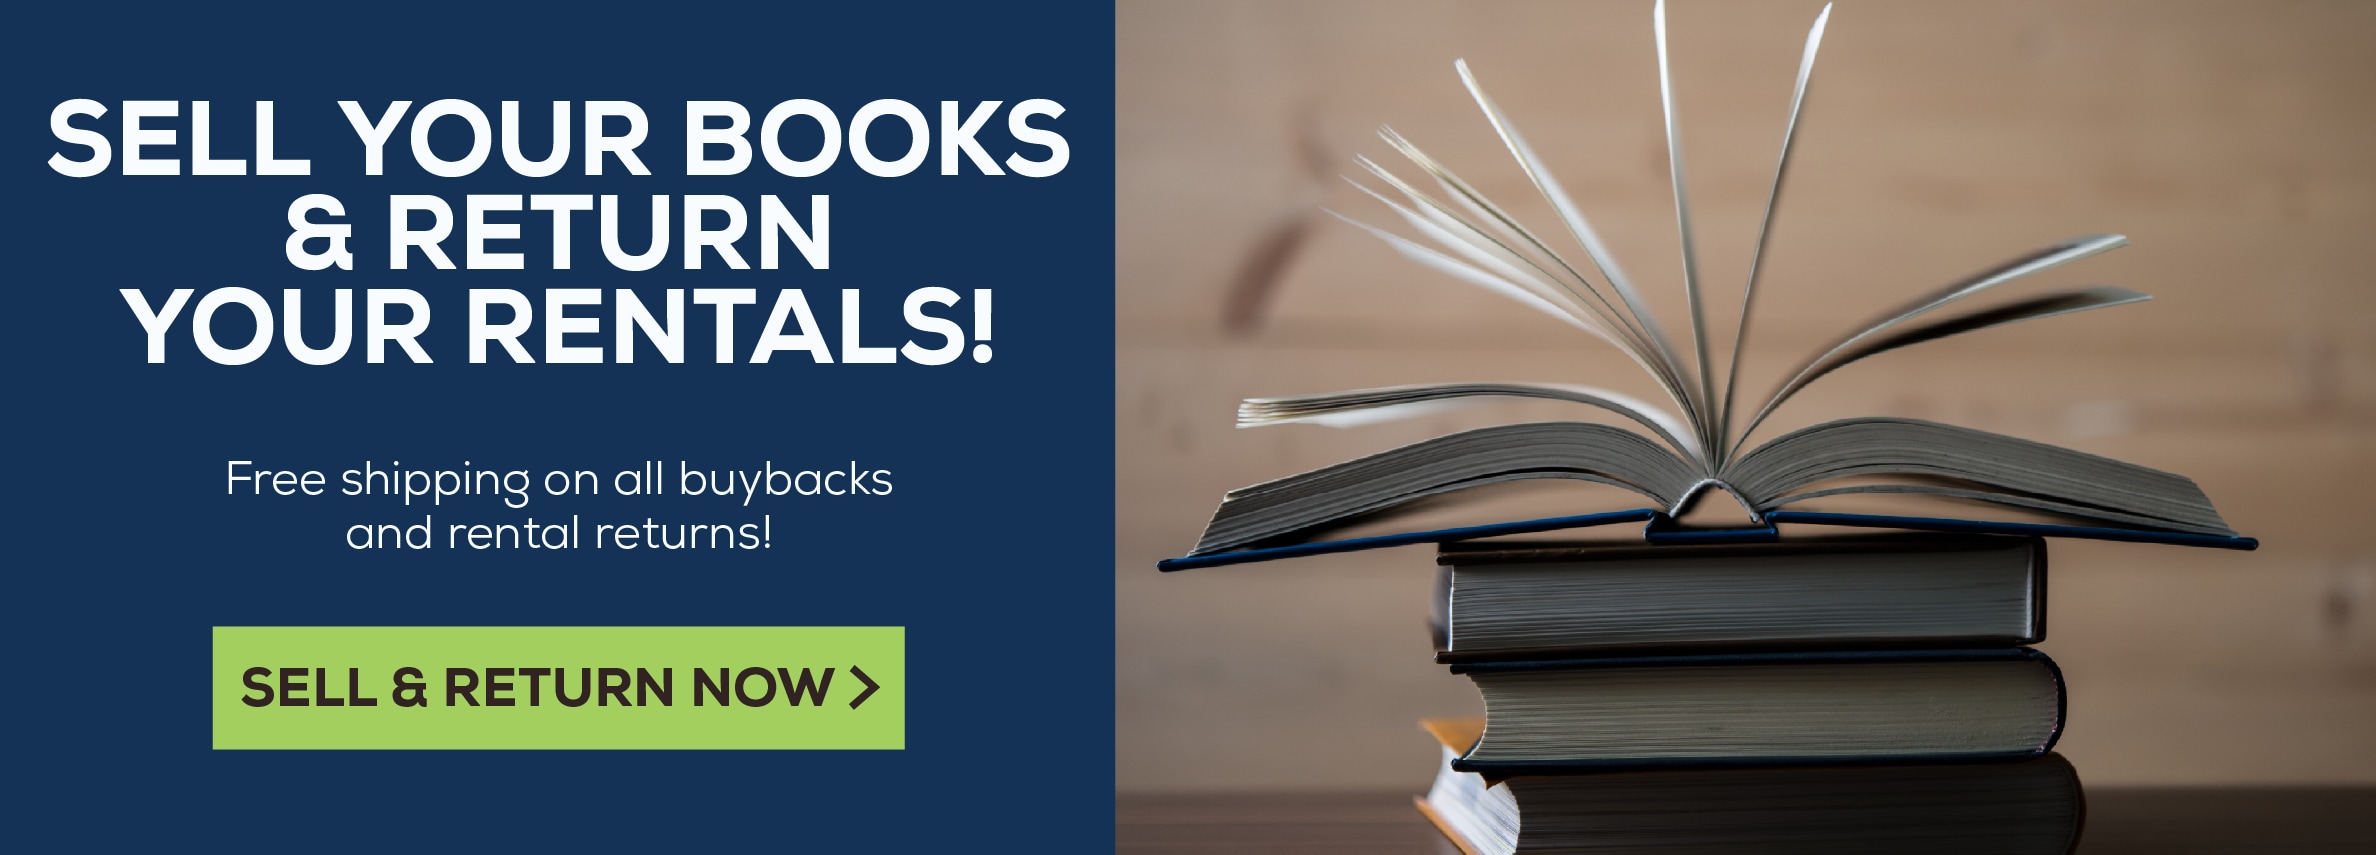 Sell your books and return your rentals! free shipping on all buybacks and rental returns. Sell and retrun now